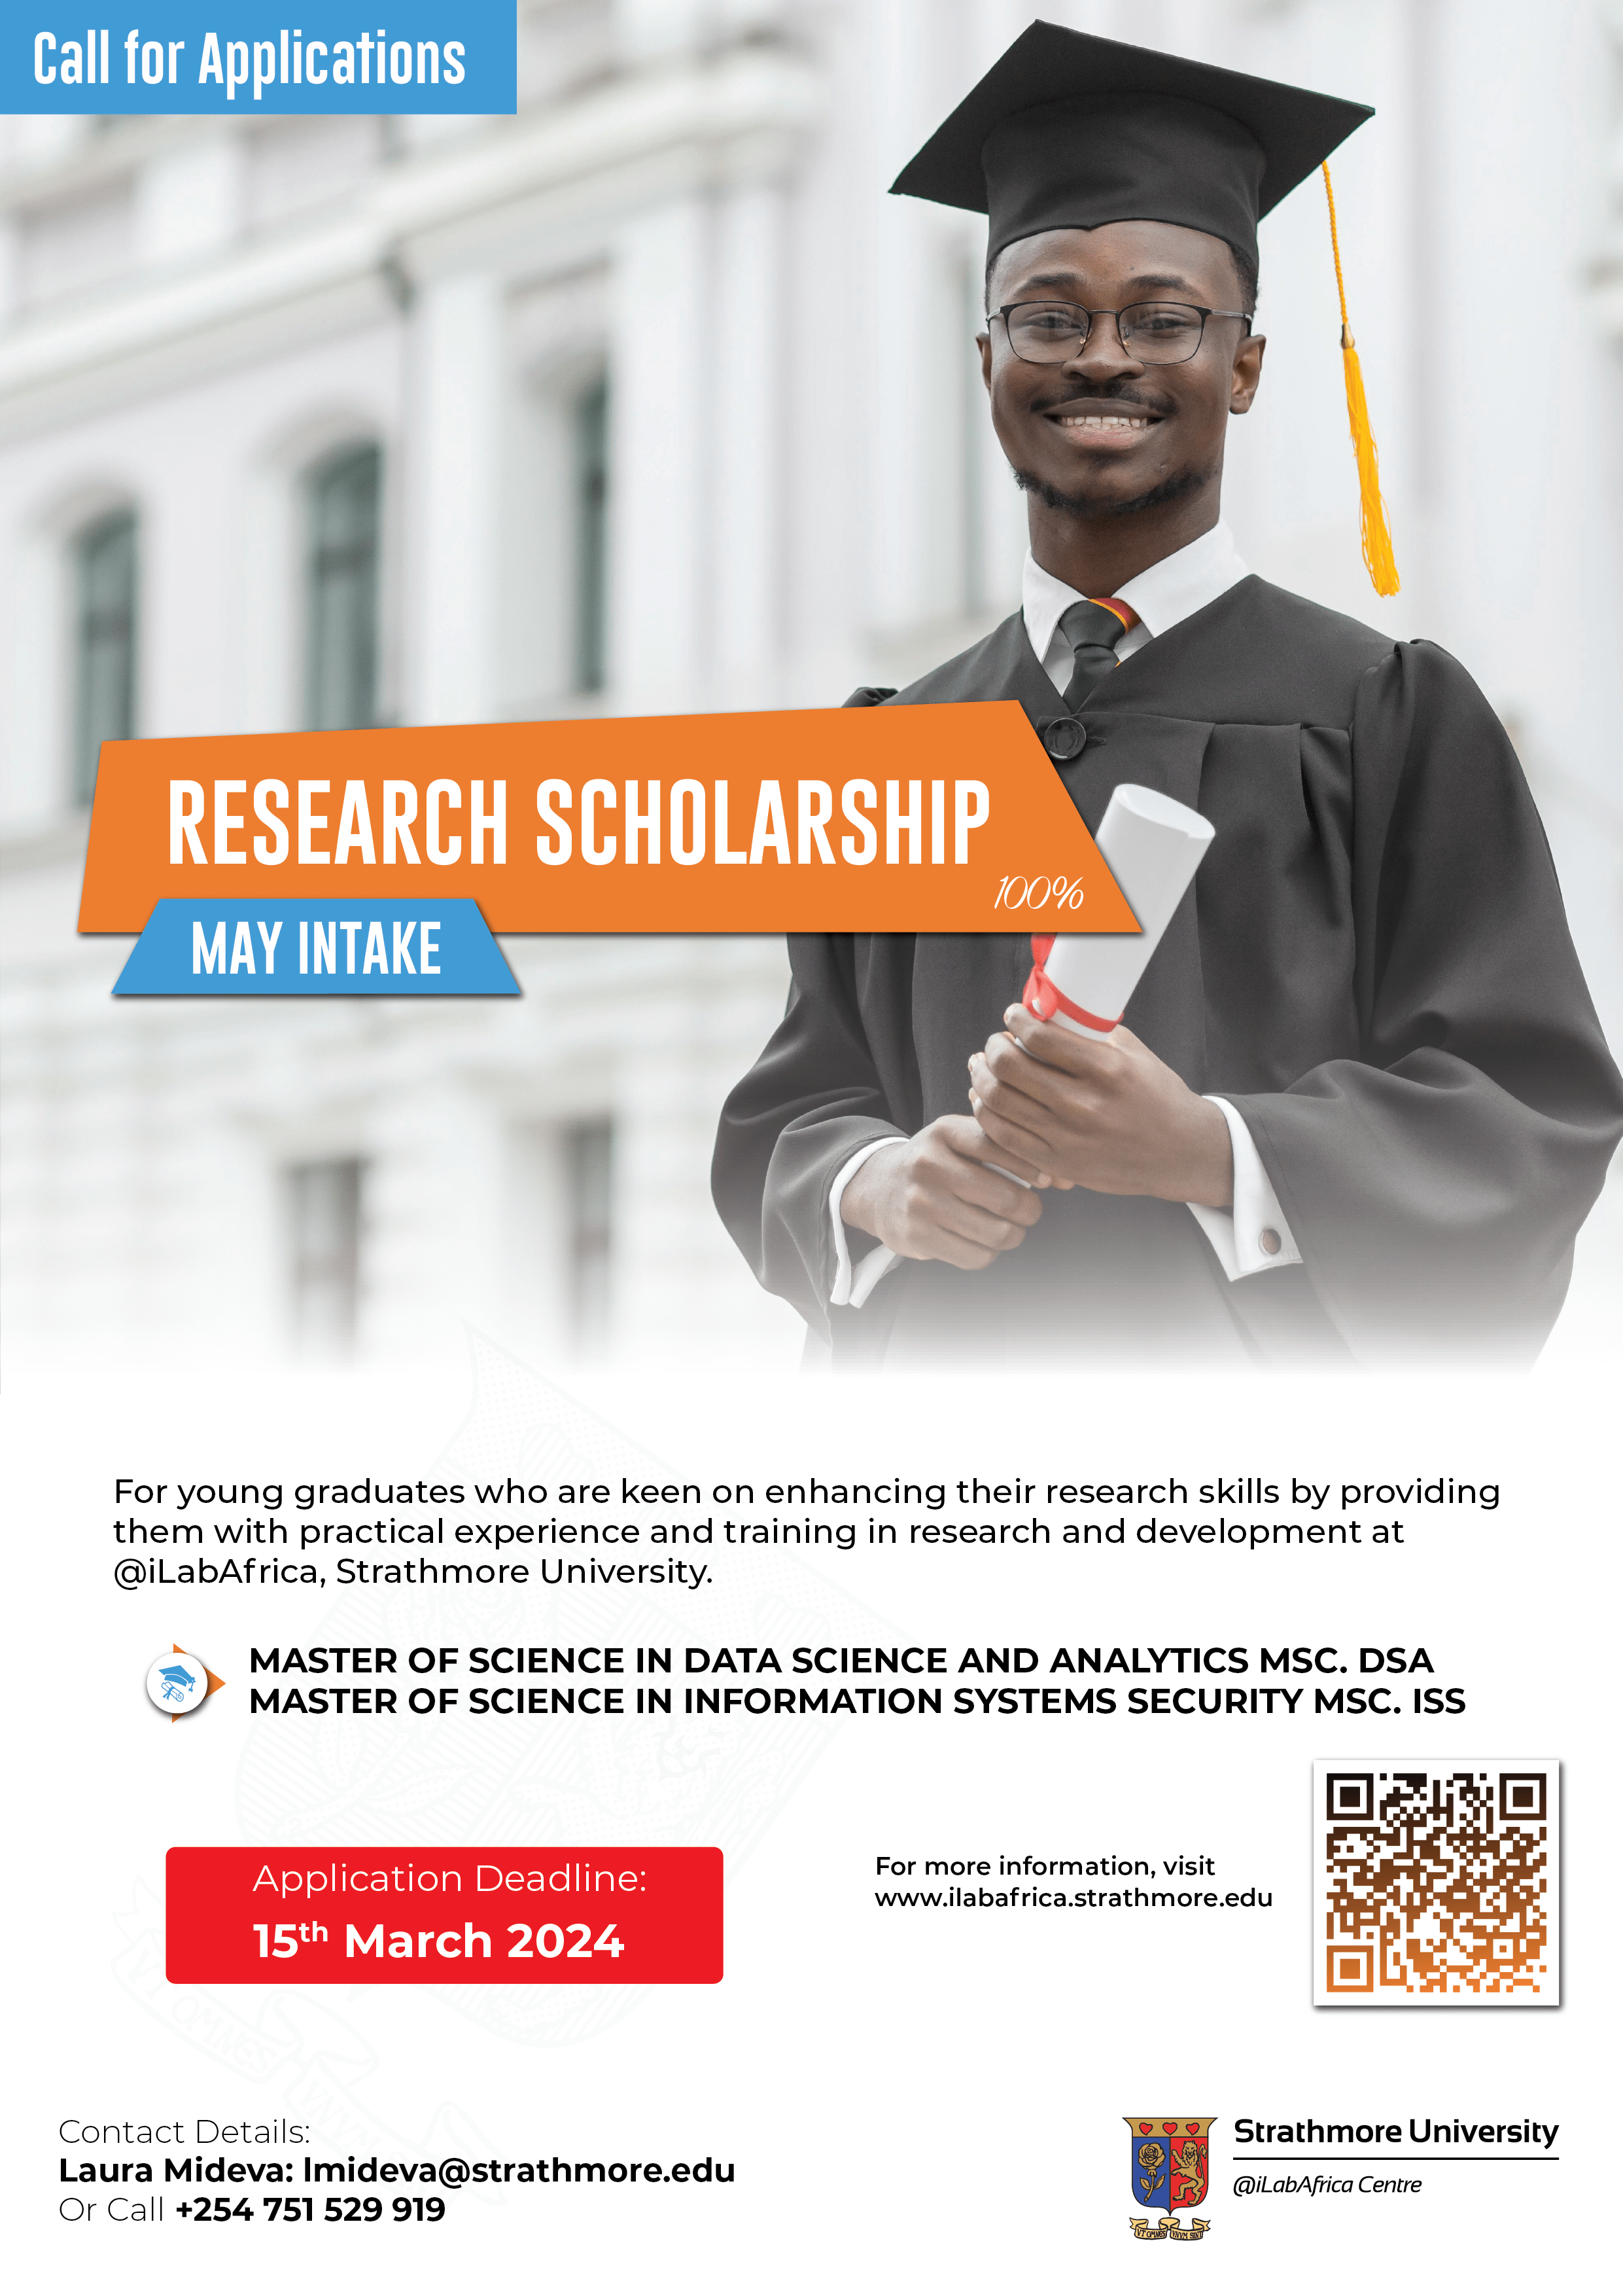 in research scholarship